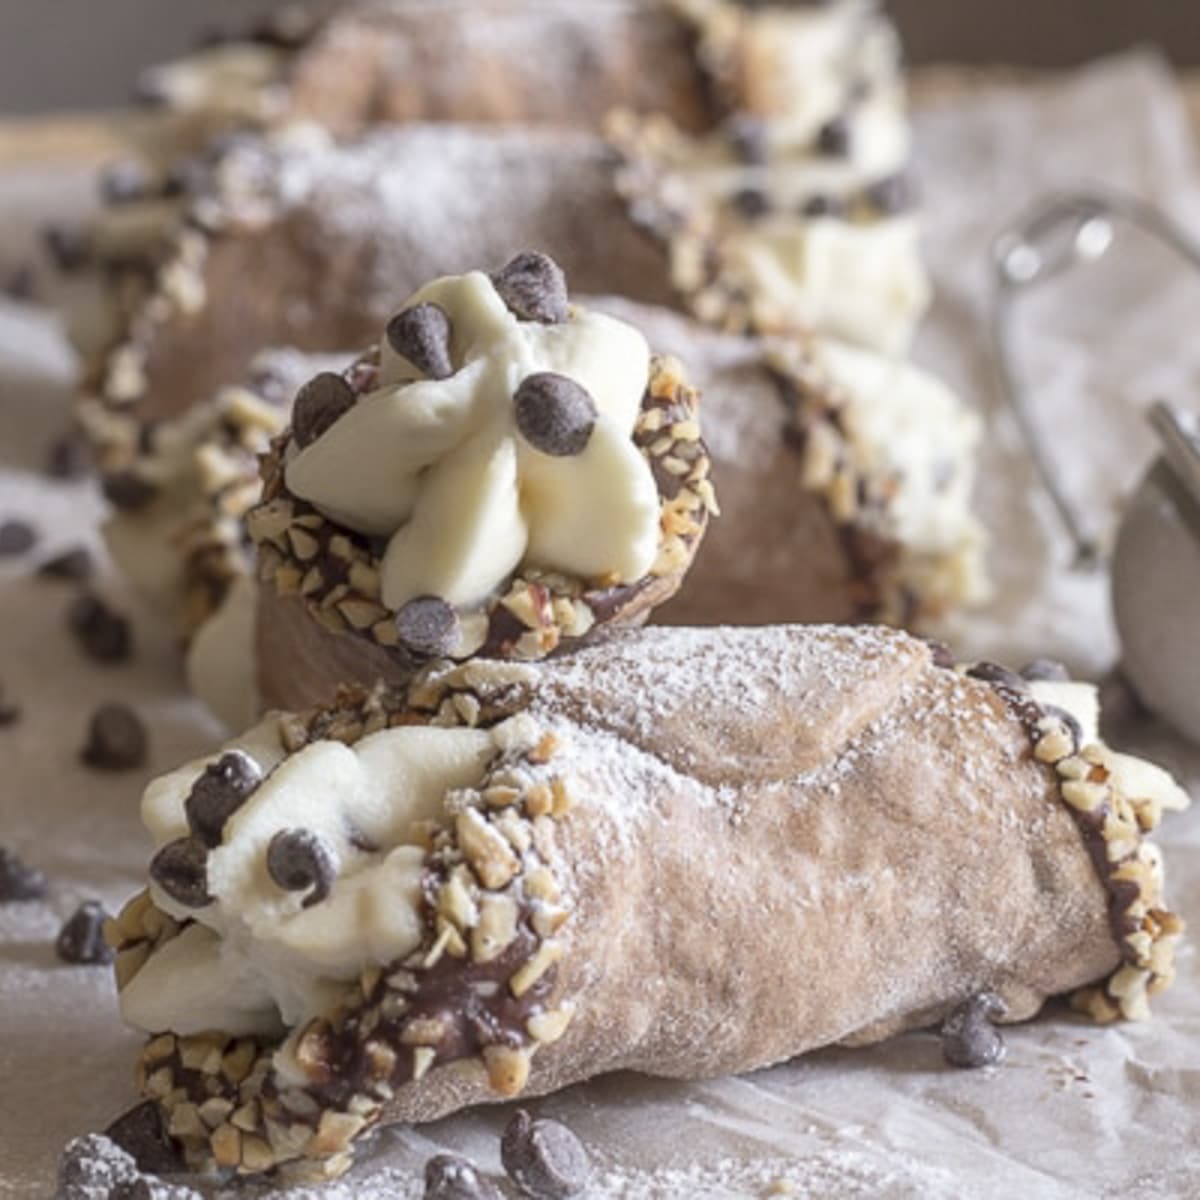 How to make delicious cannoli with authentic DIY wood cannoli rollers.